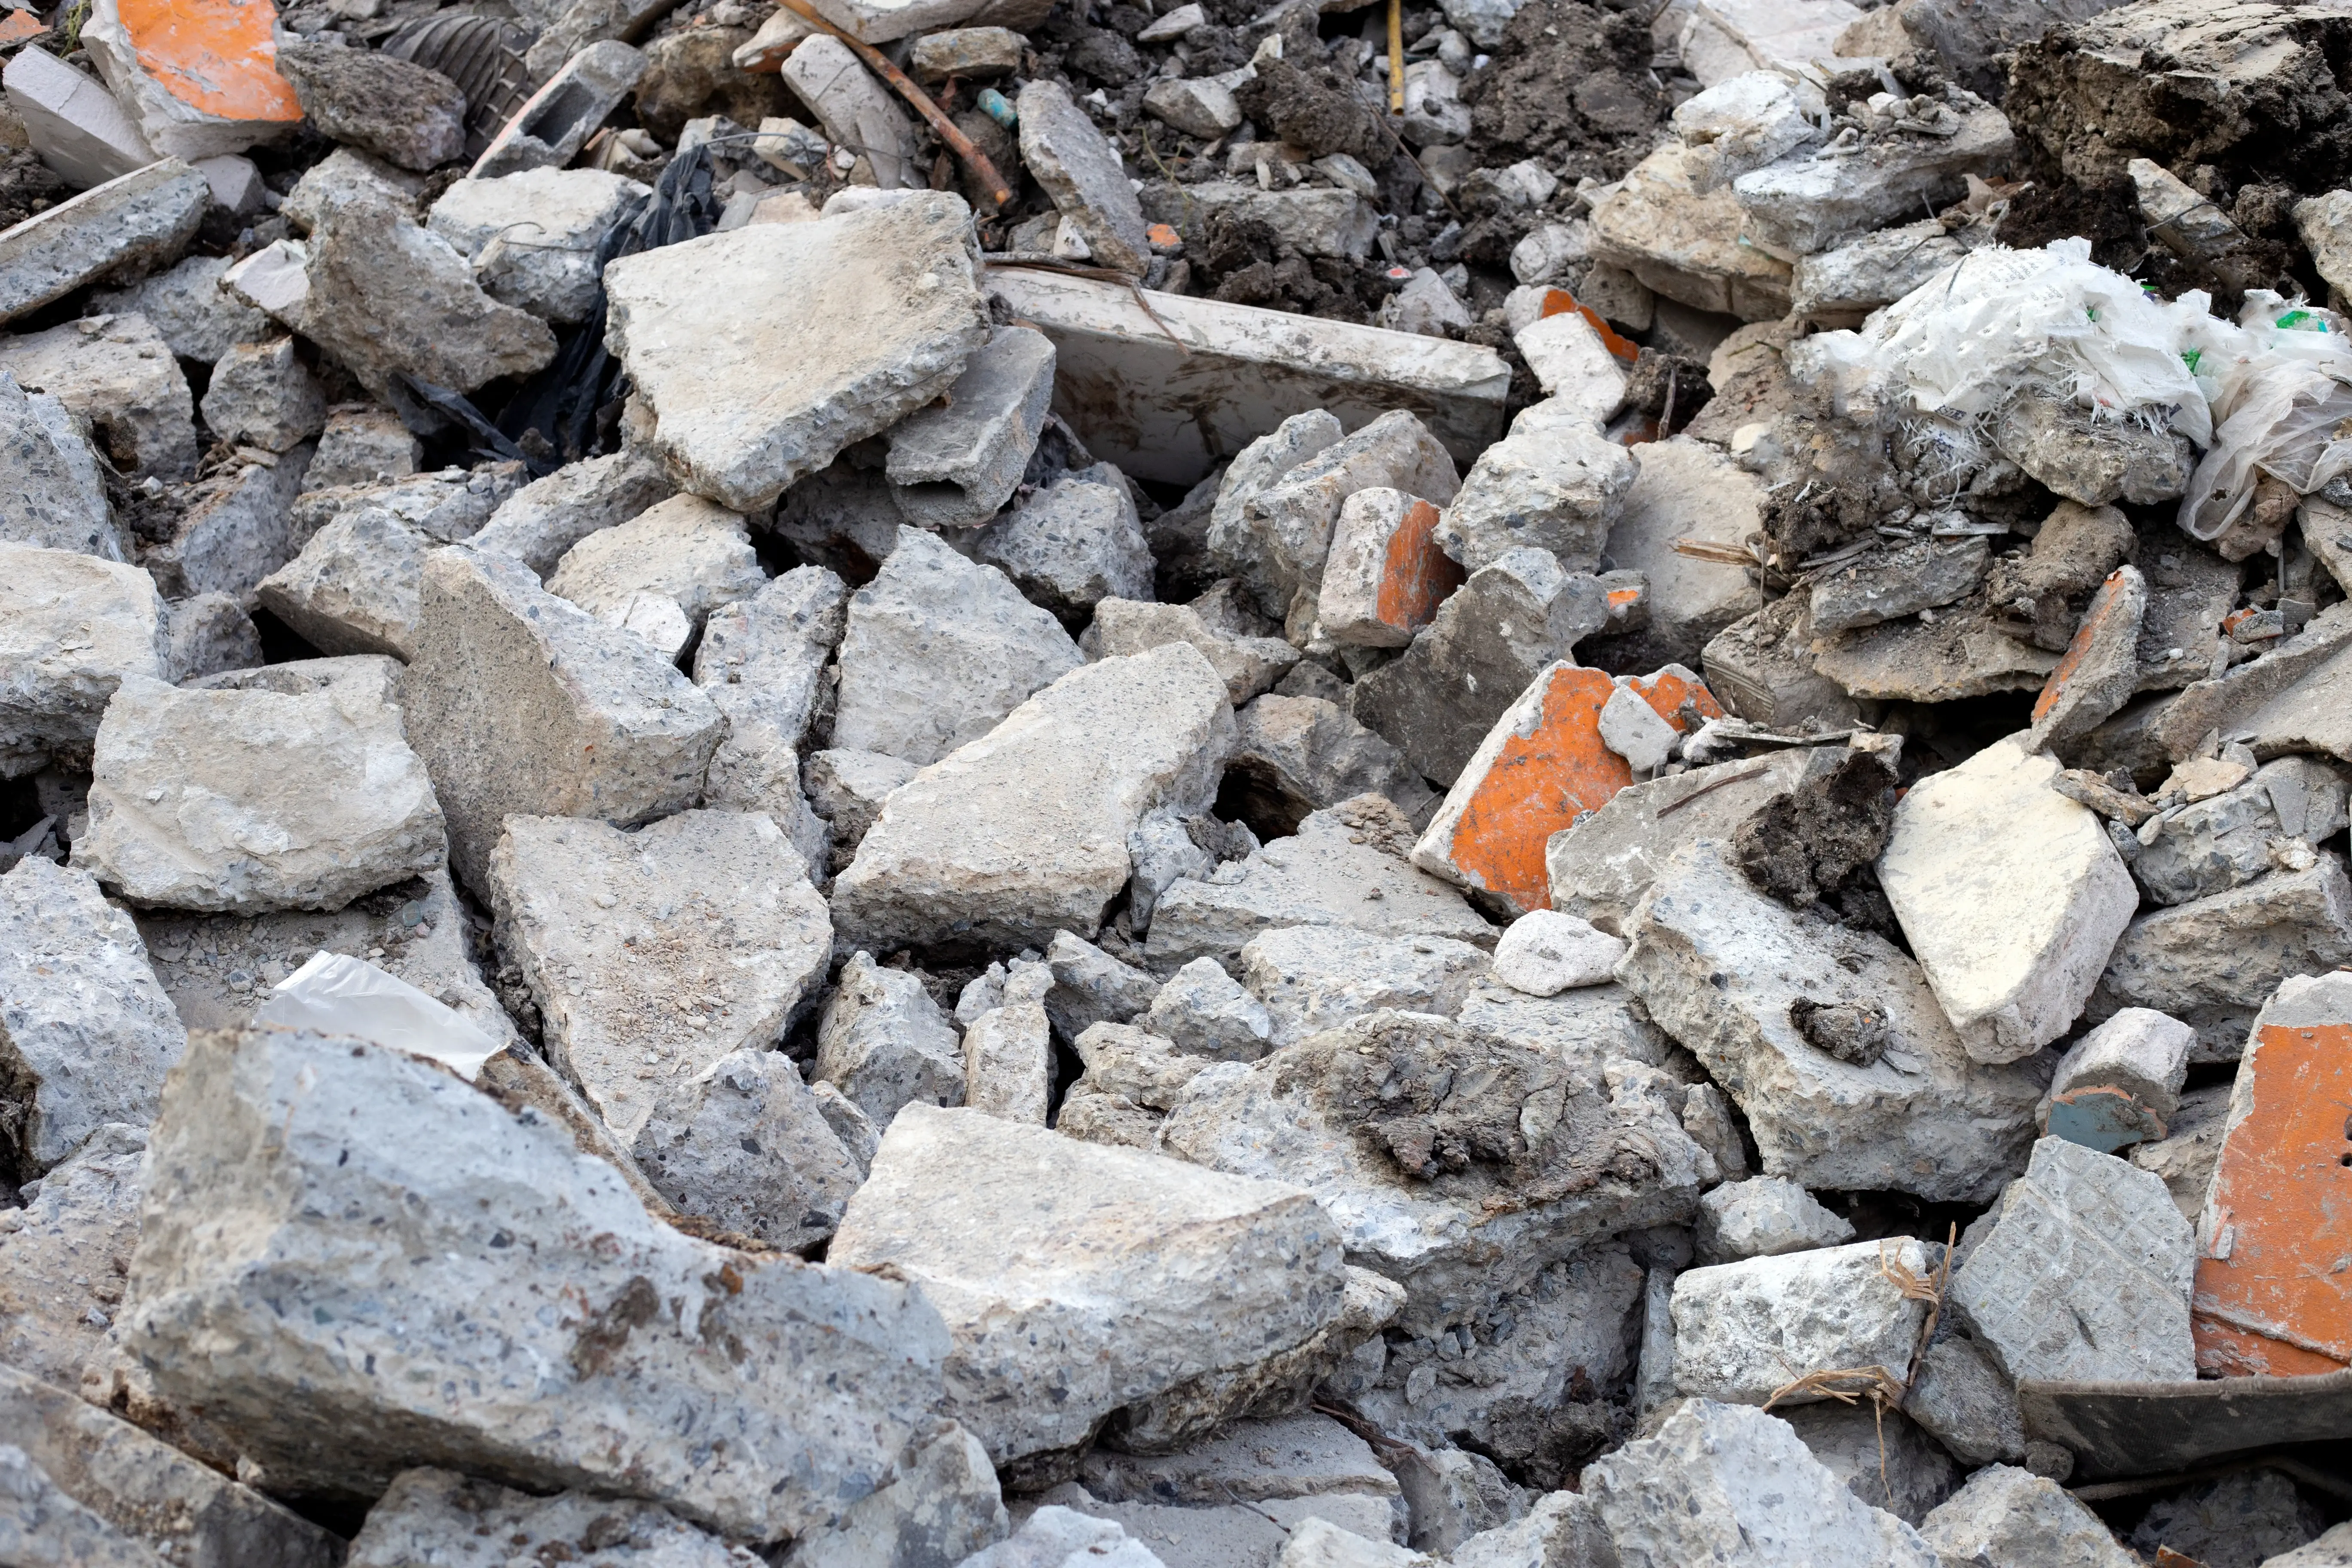 Pile of broken concrete rubble from a recent excavation project in Philadelphia